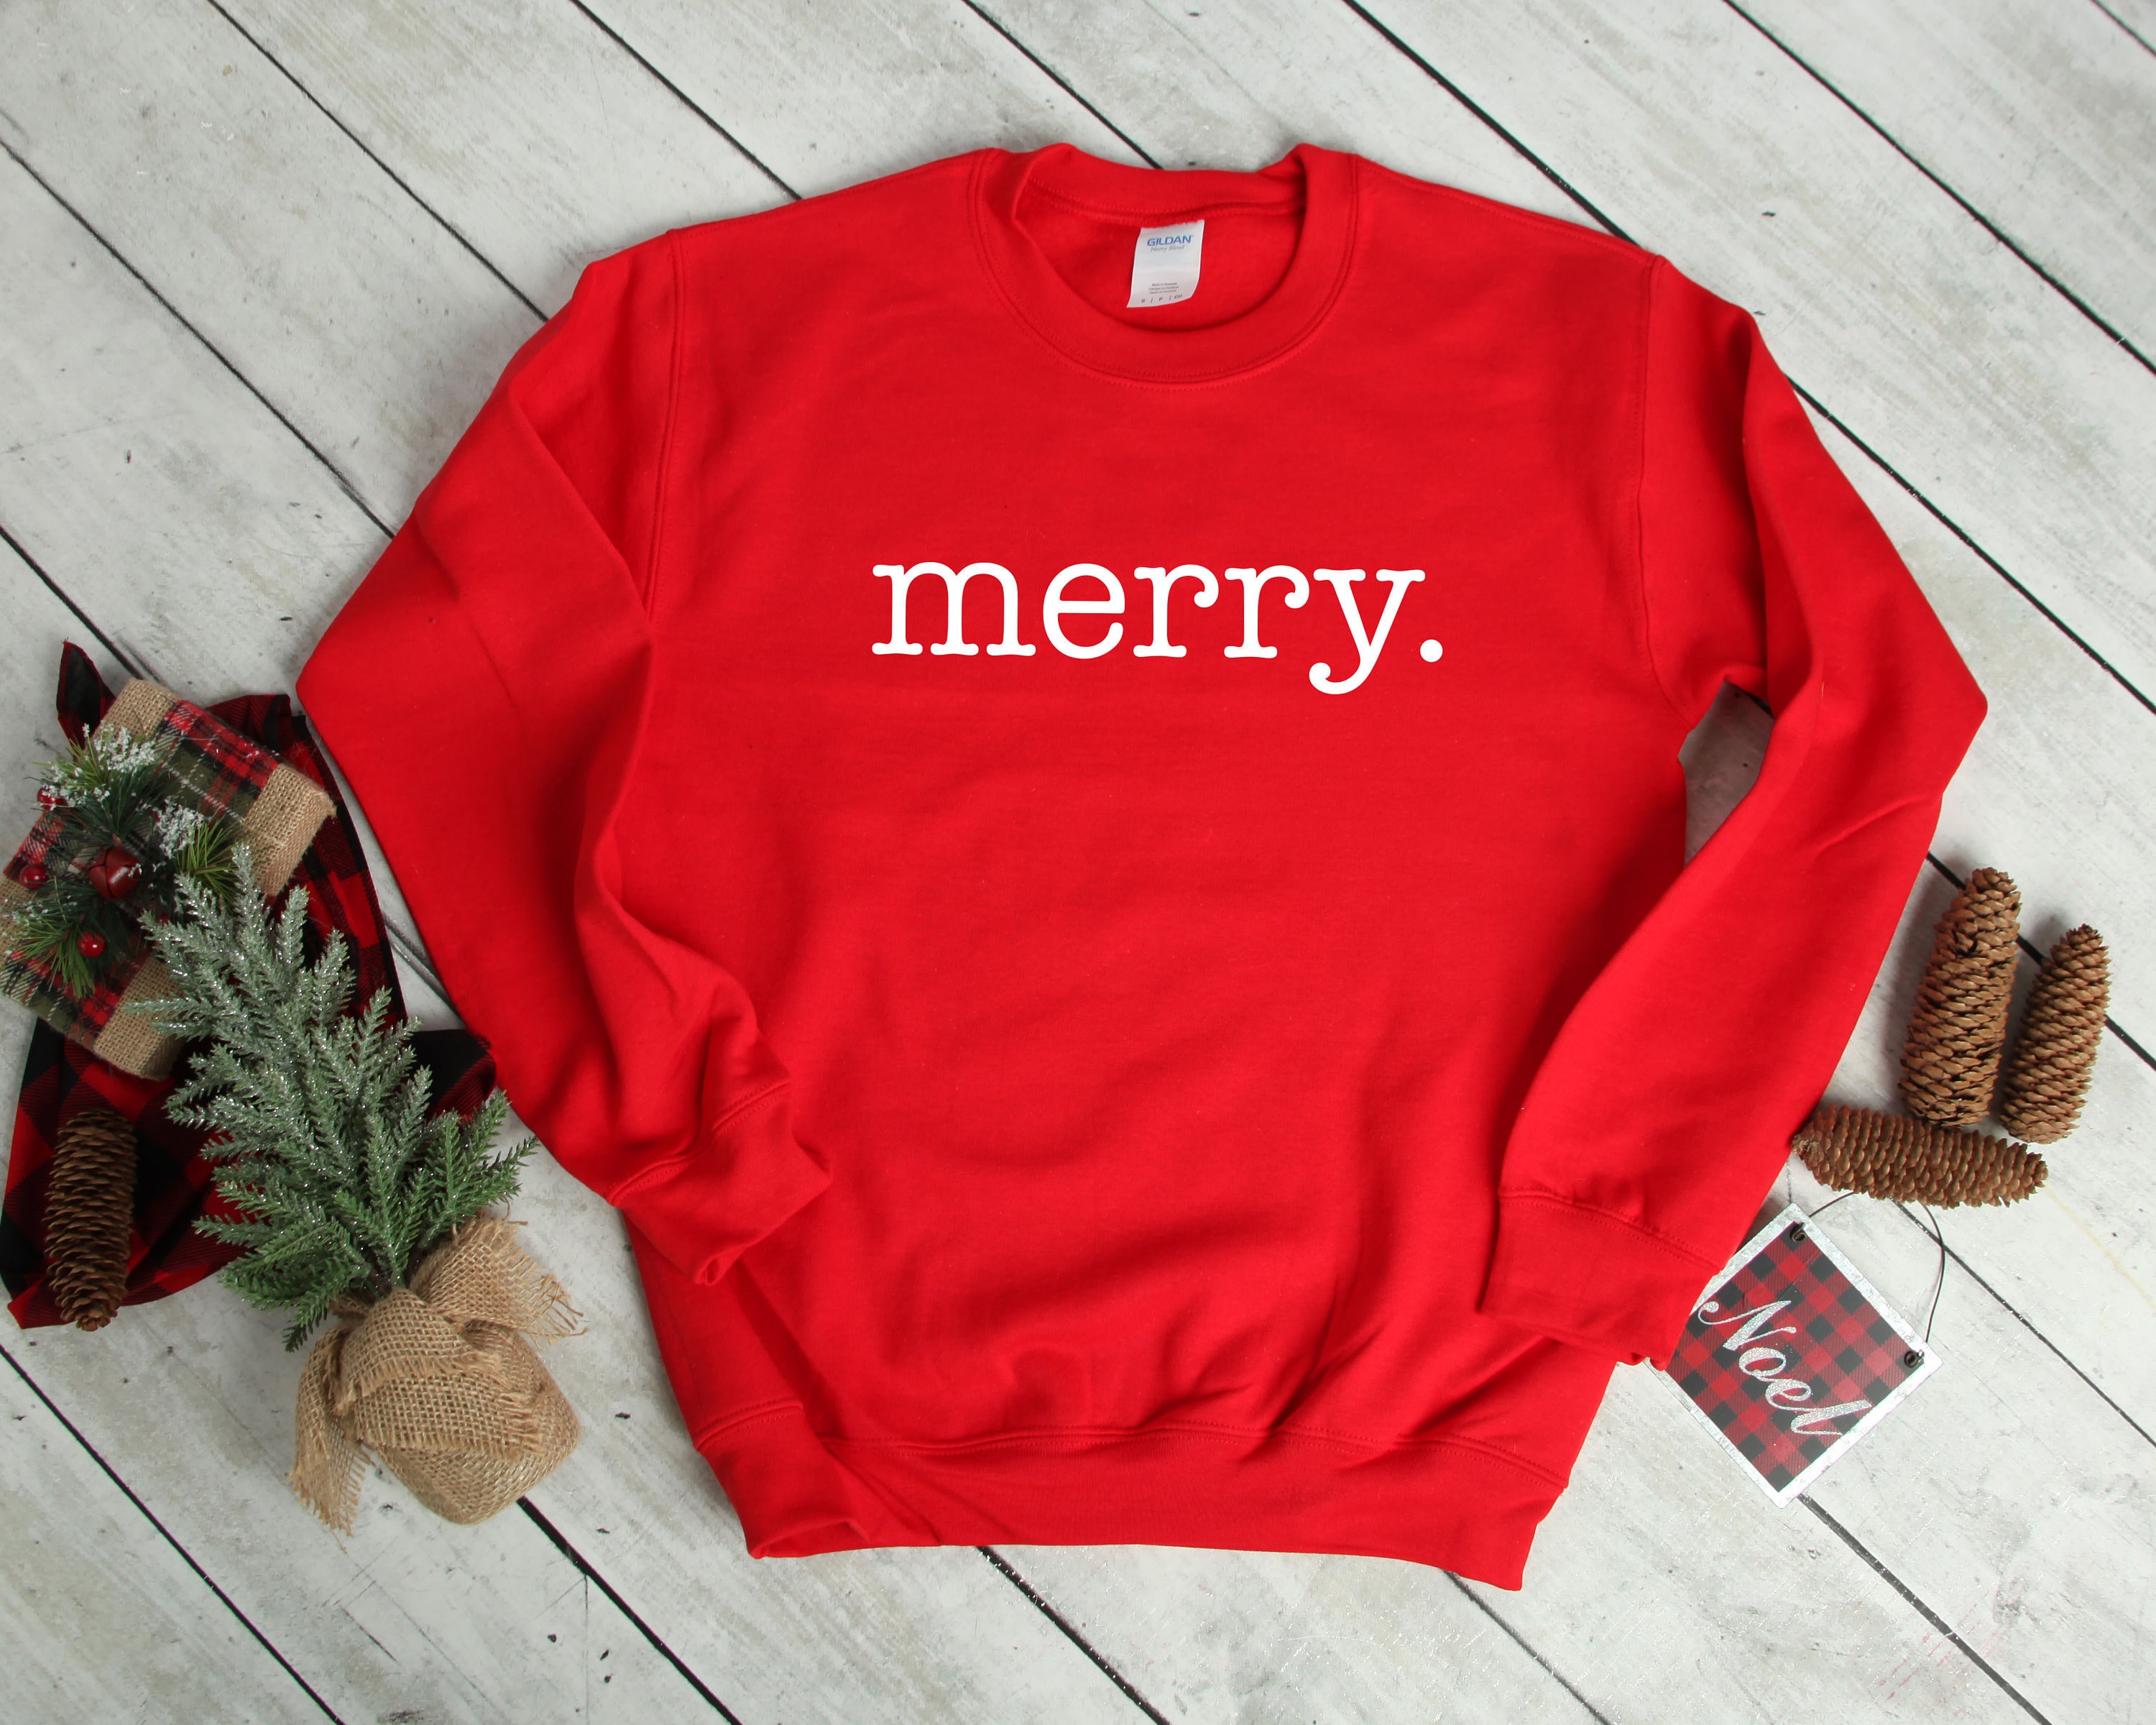 Merry Heavy Blend Crewneck Sweatshirt, Christmas Sweater, Holiday Fall Gift, Gift For Mom, Her